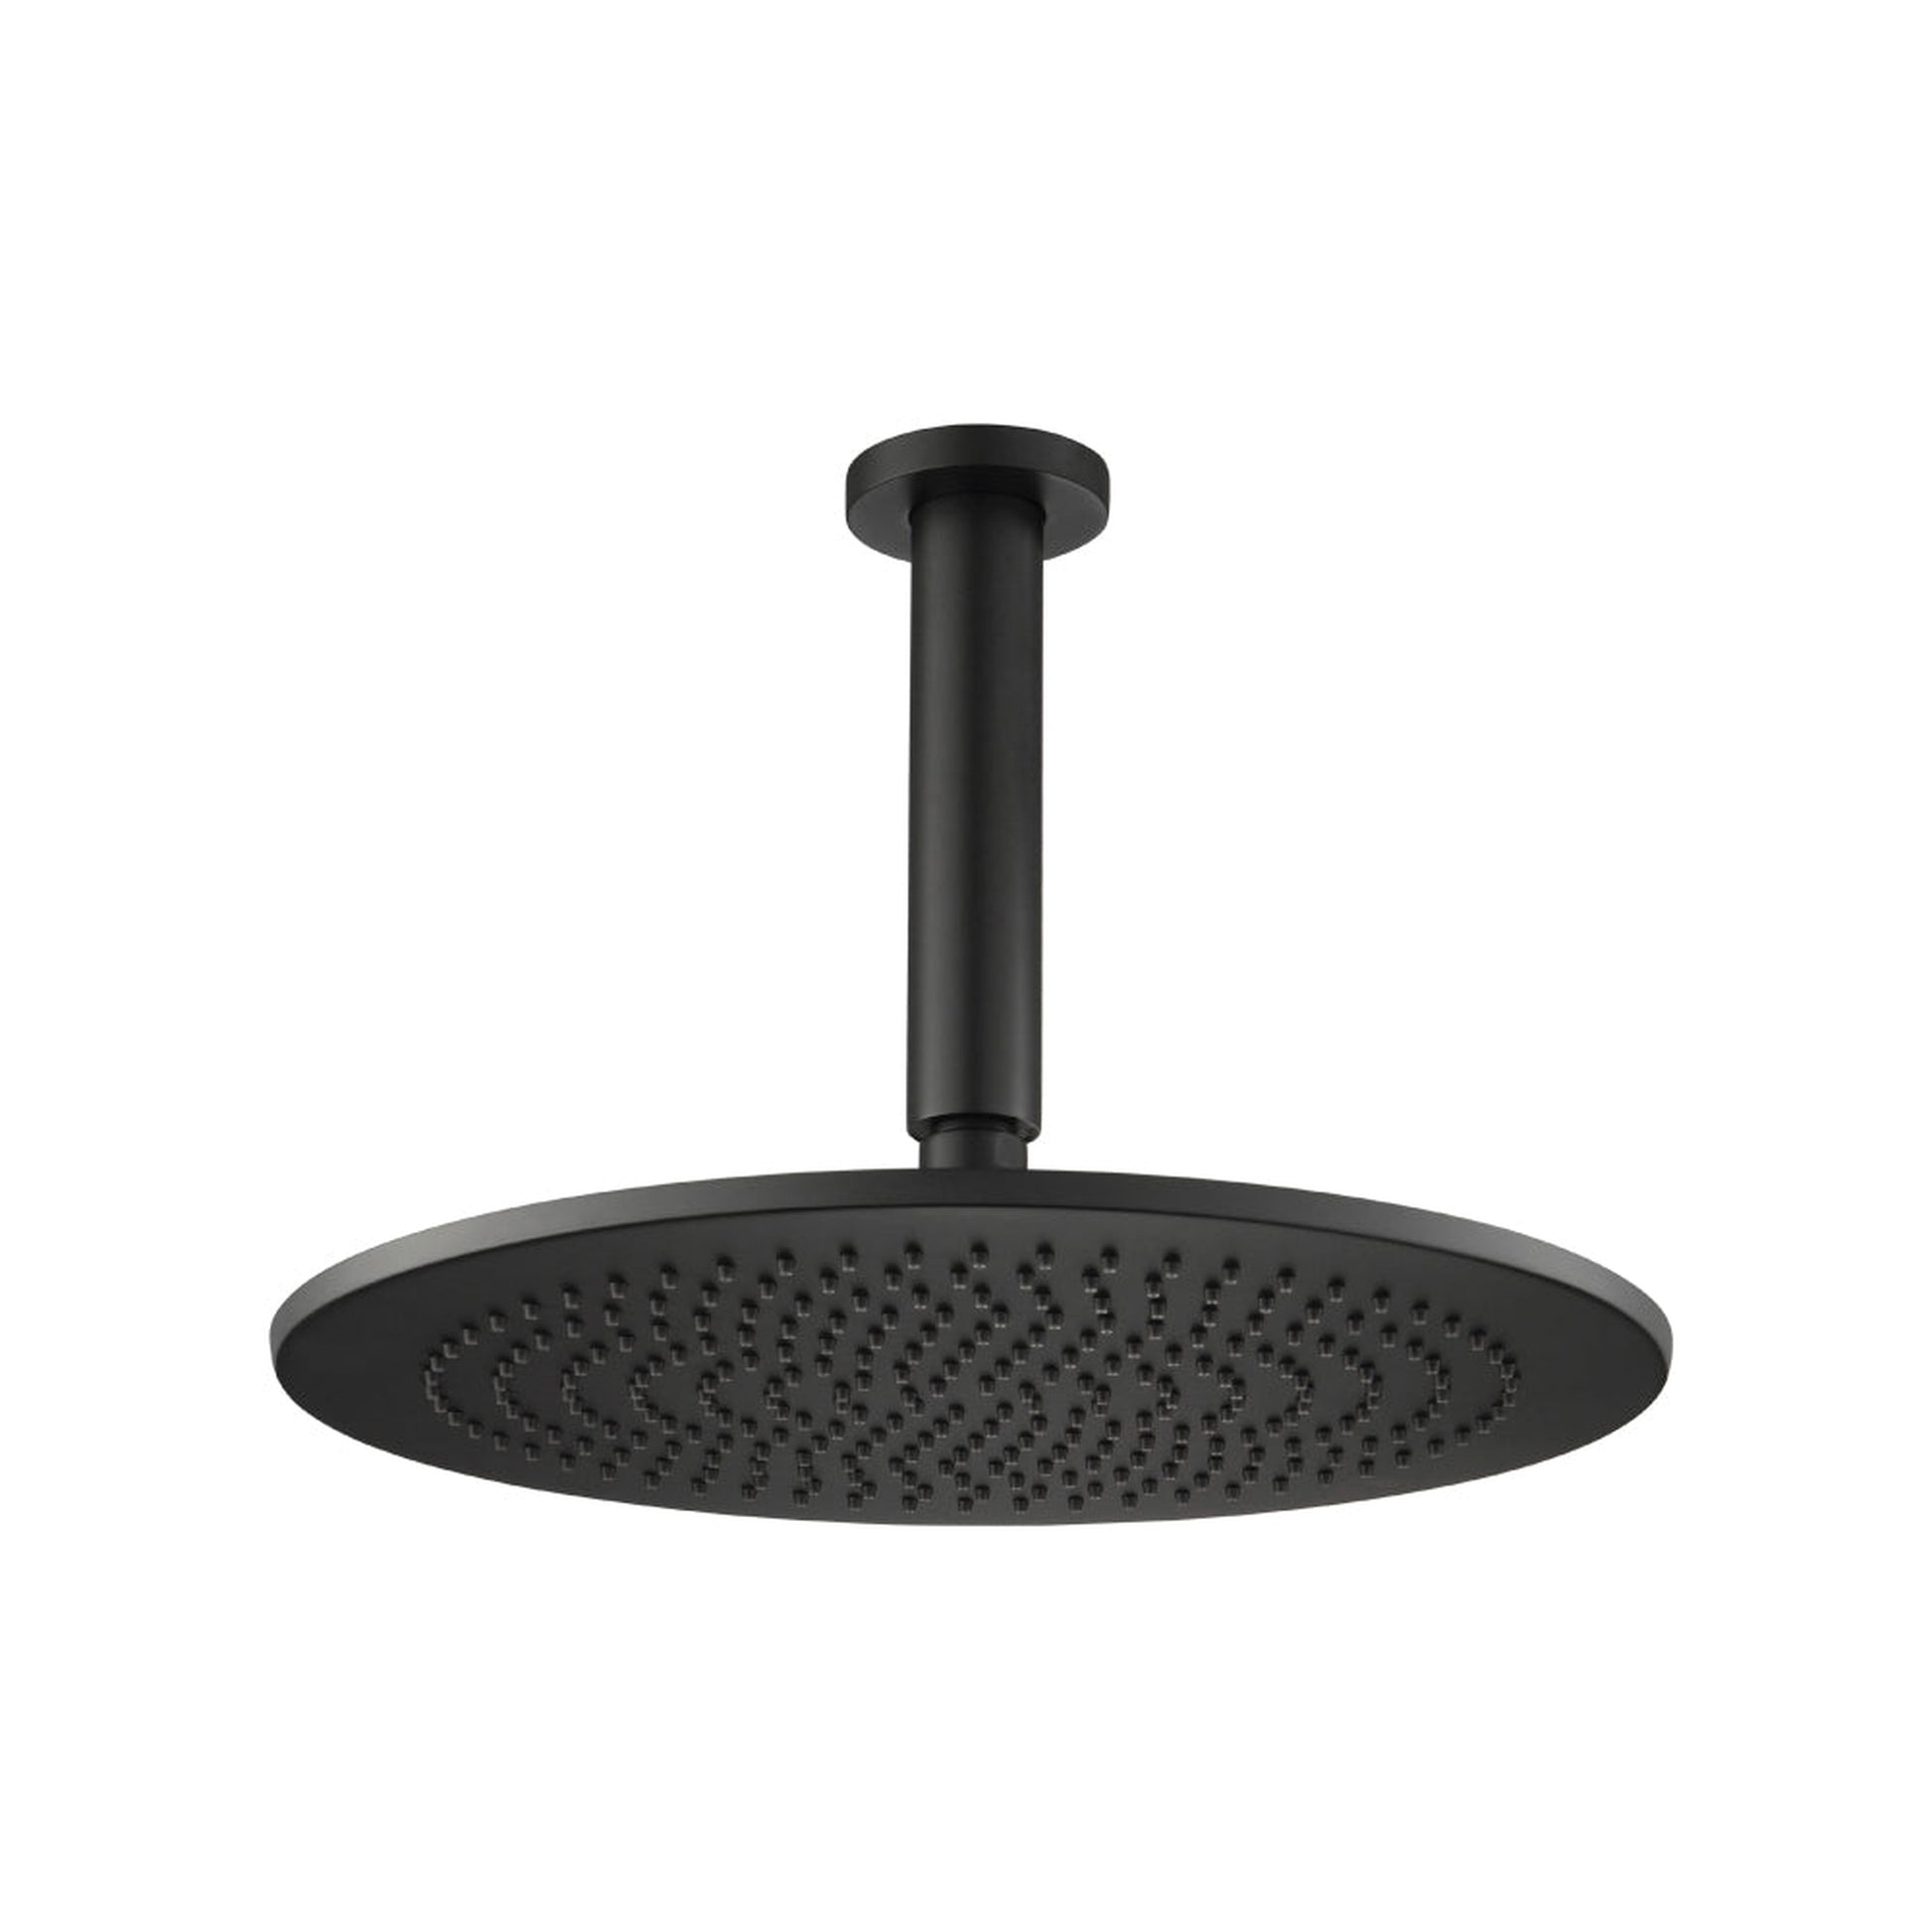 Isenberg Universal Fixtures 12" Single Function Round Matte Black Solid Brass Rain Shower Head With 6" Ceiling Mounted Shower Arm